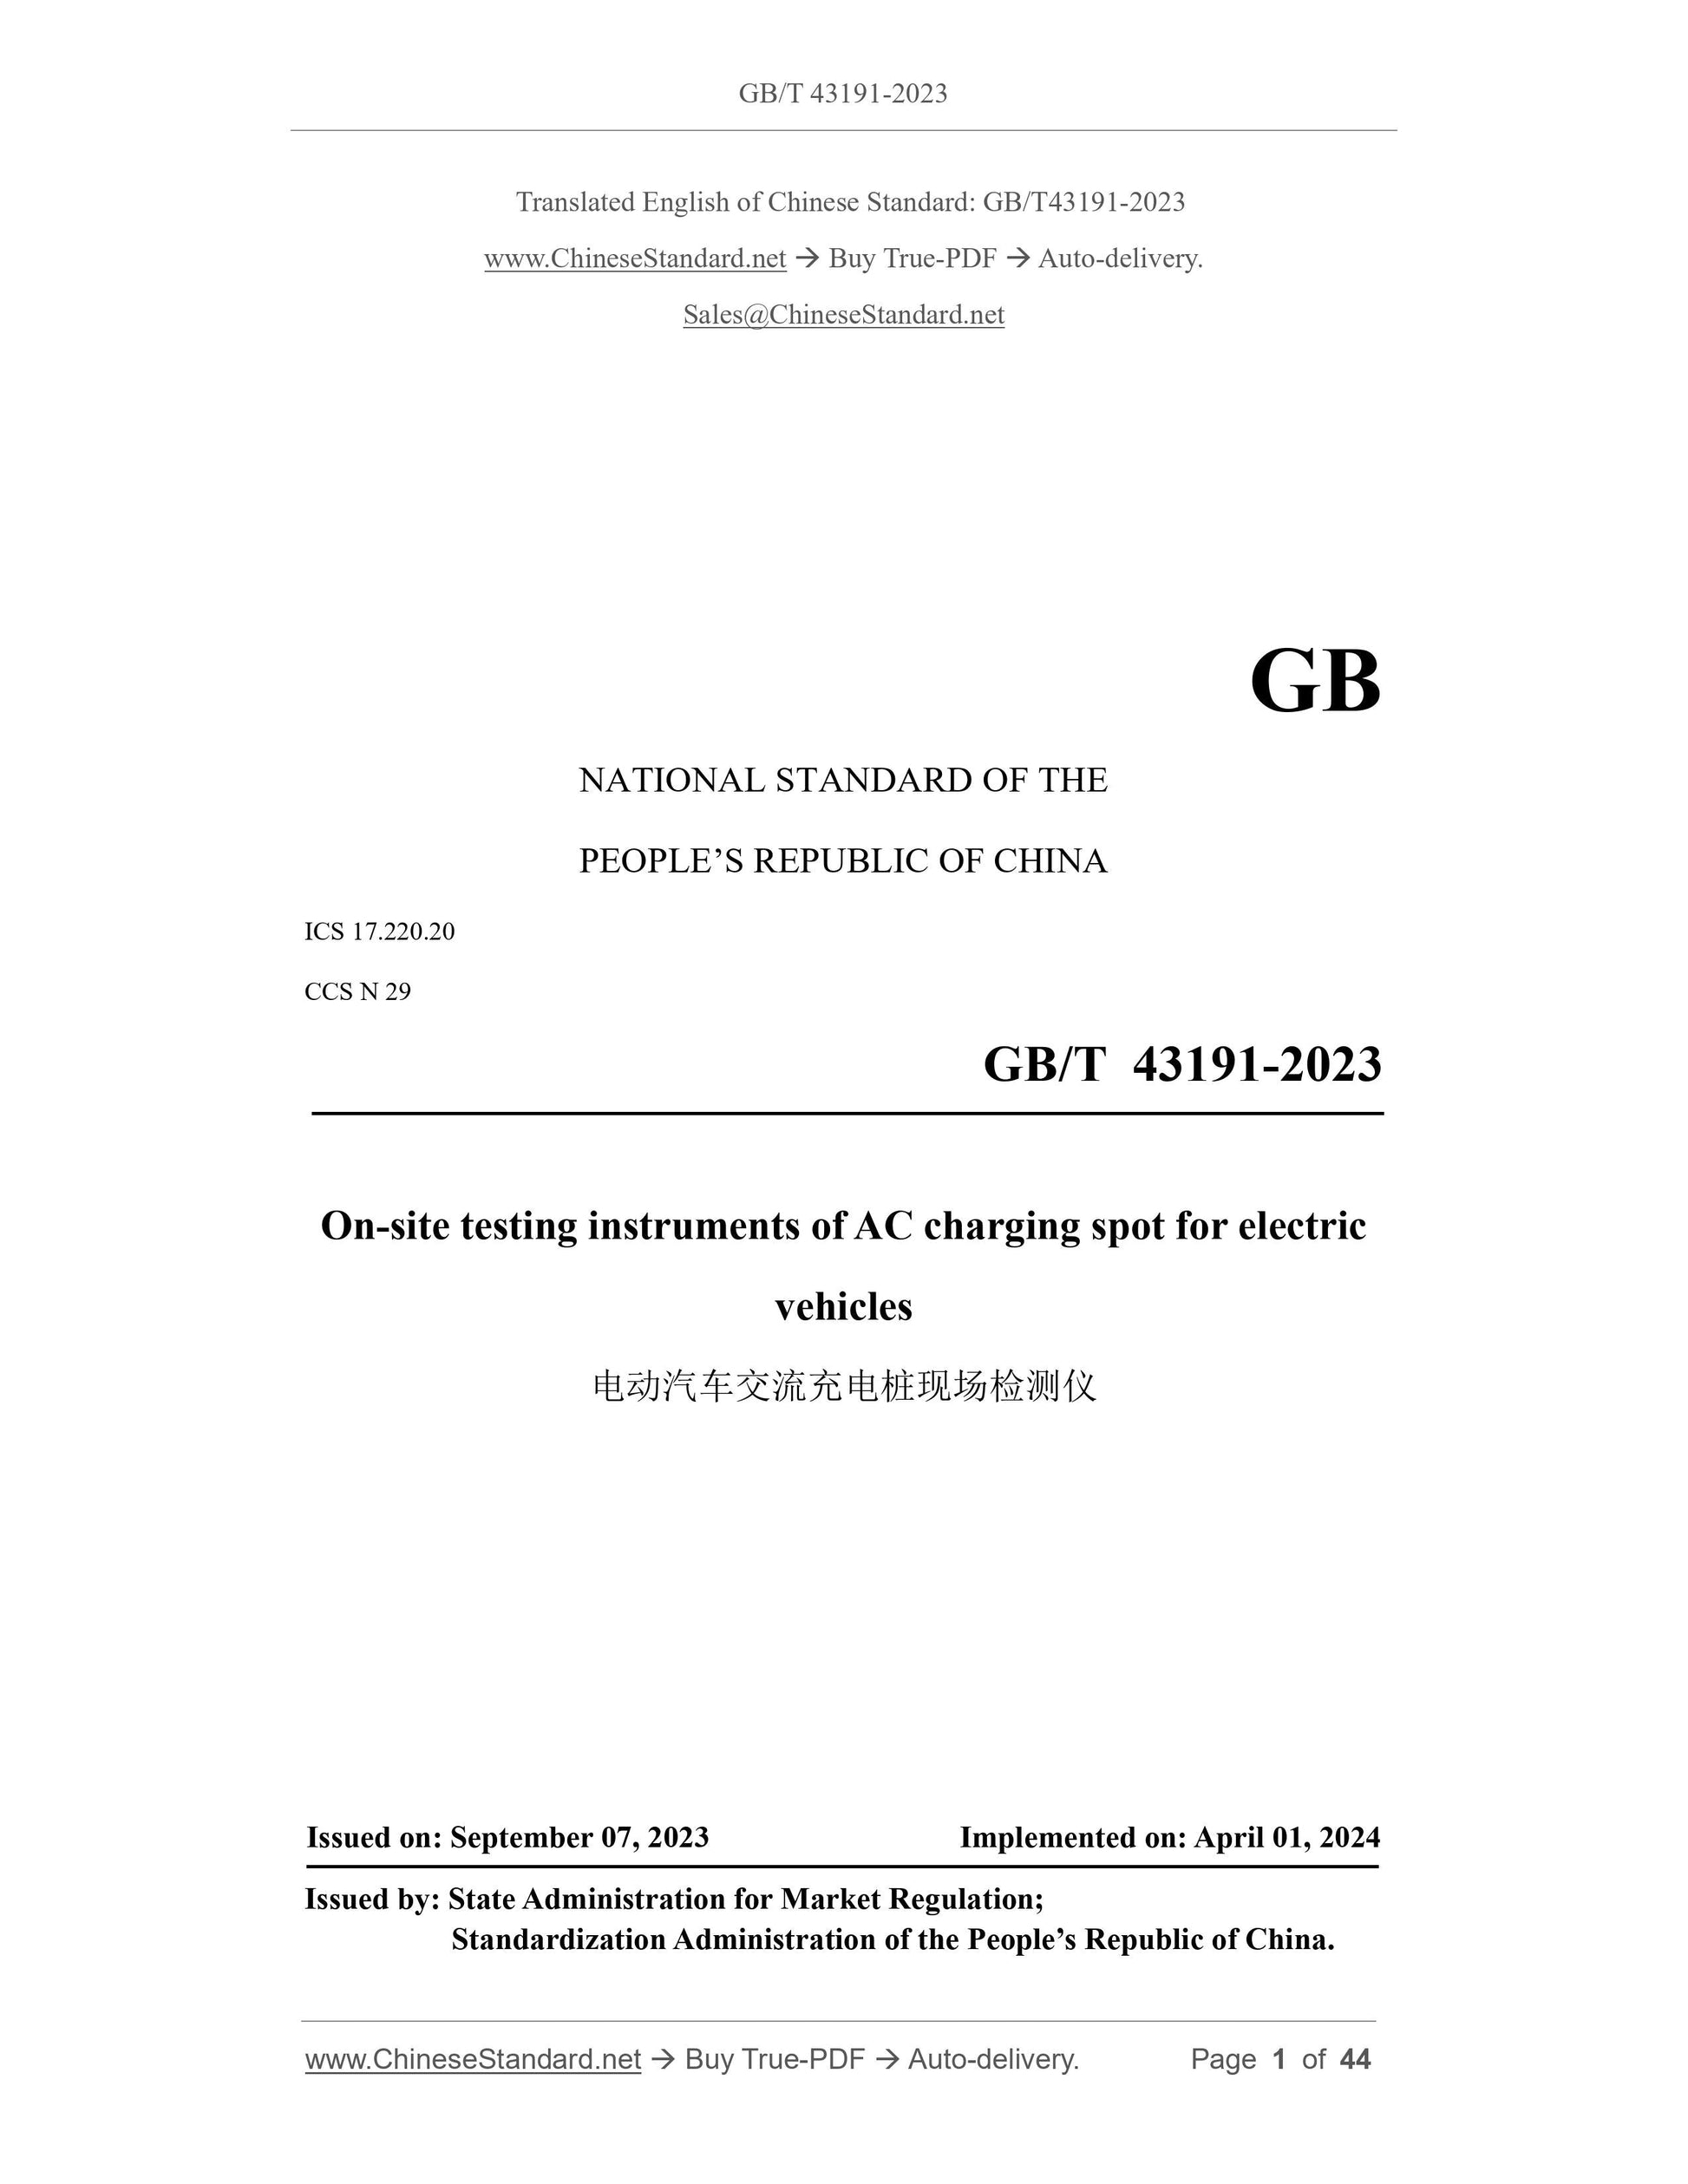 GB/T 43191-2023 Page 1